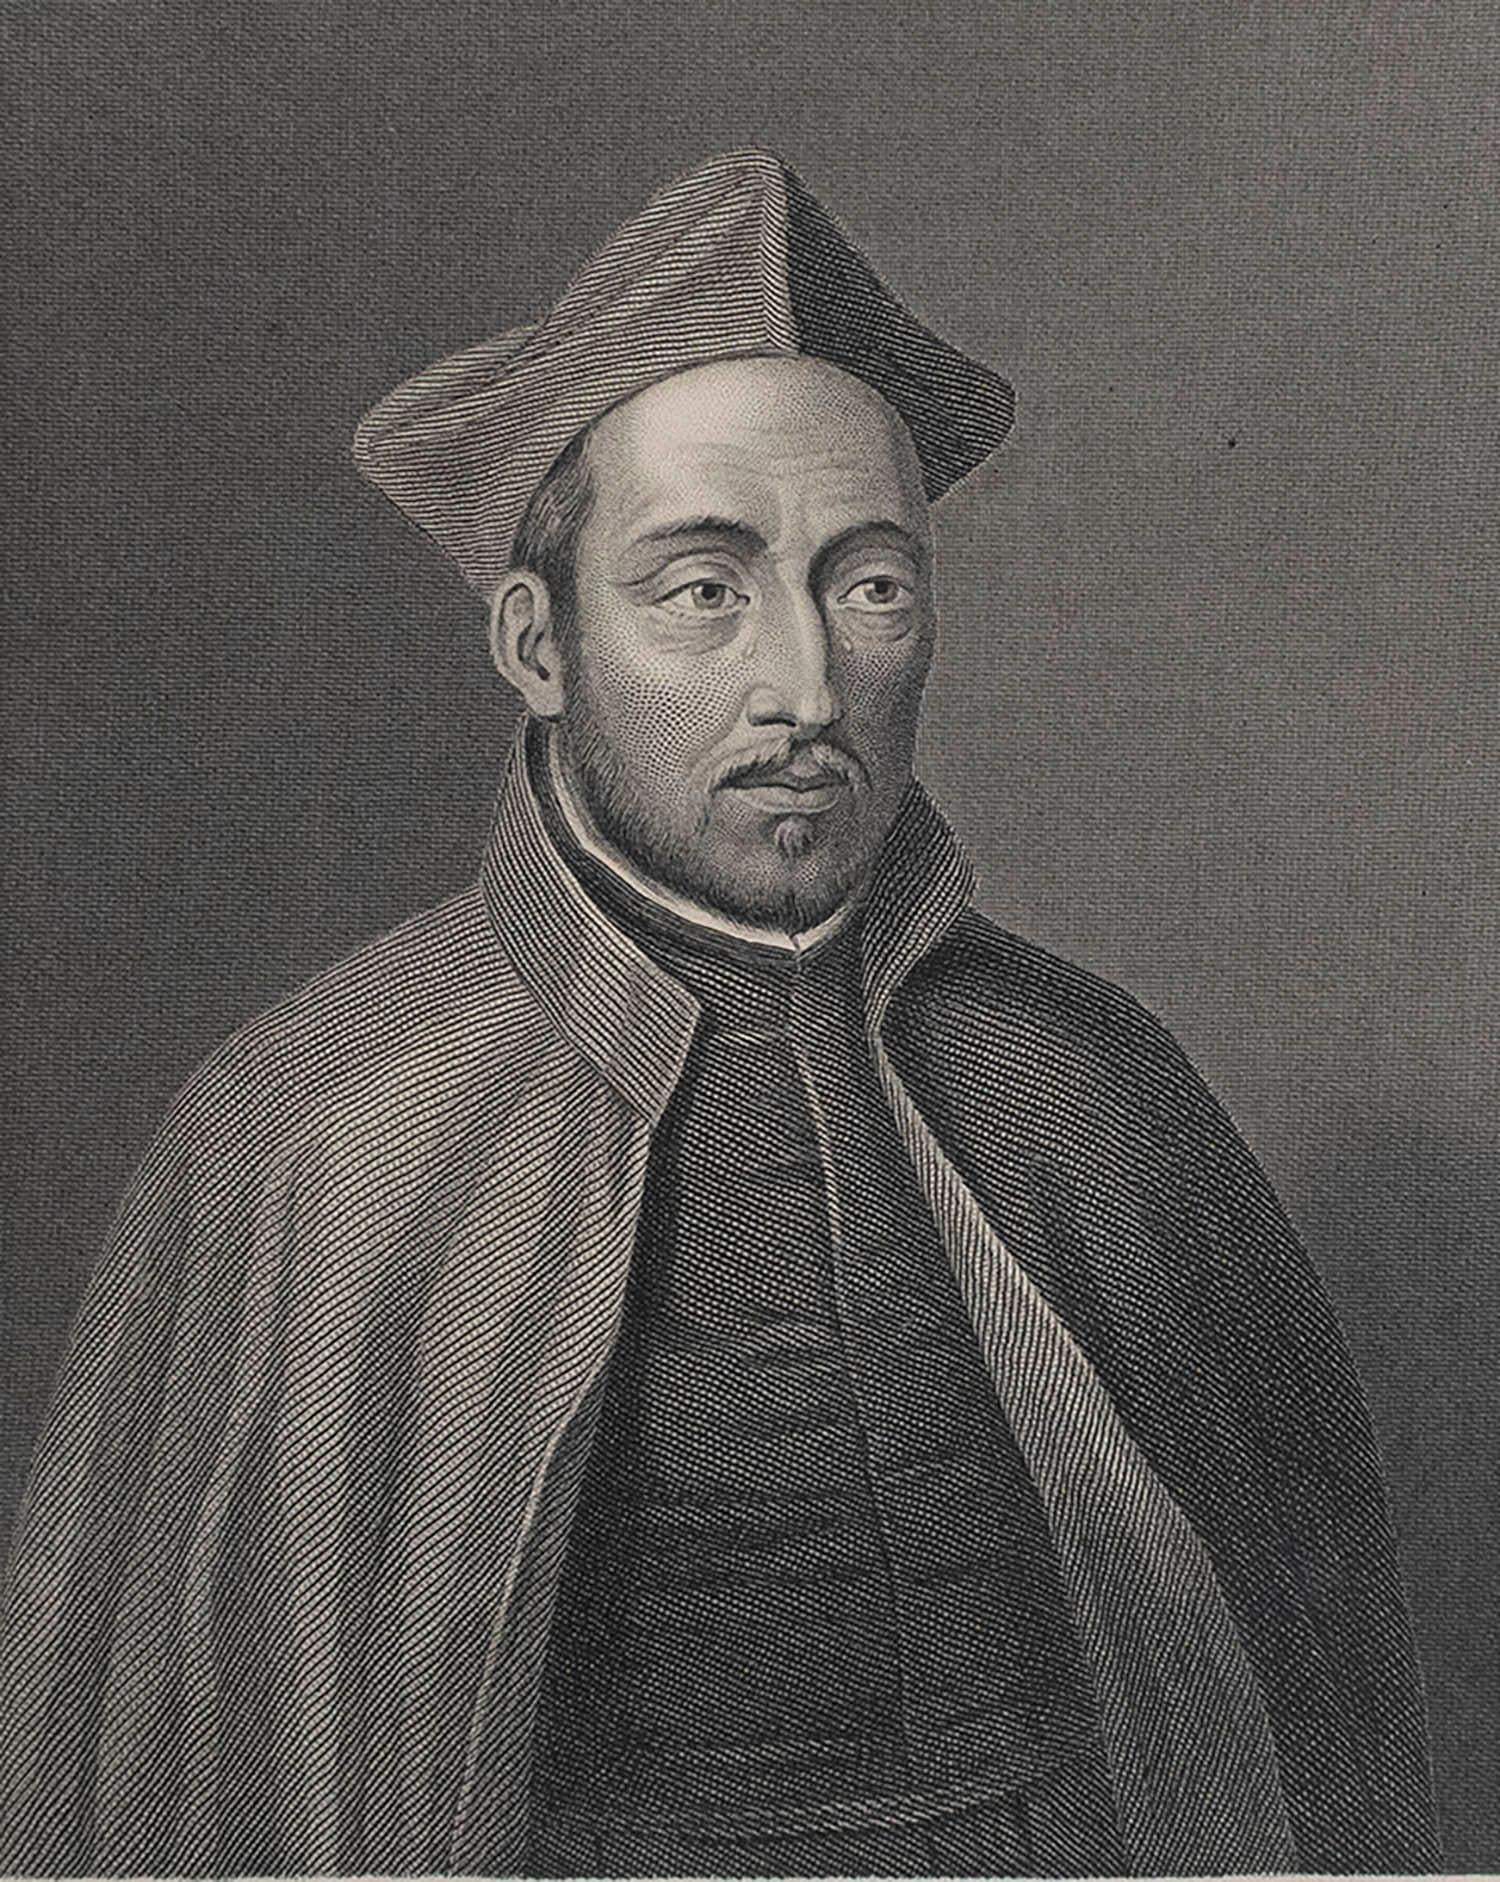 Great image of Ignatius Loyola

Fine steel engraving by Holl

After a print by Weirix

Published by Fullarton

Unframed.